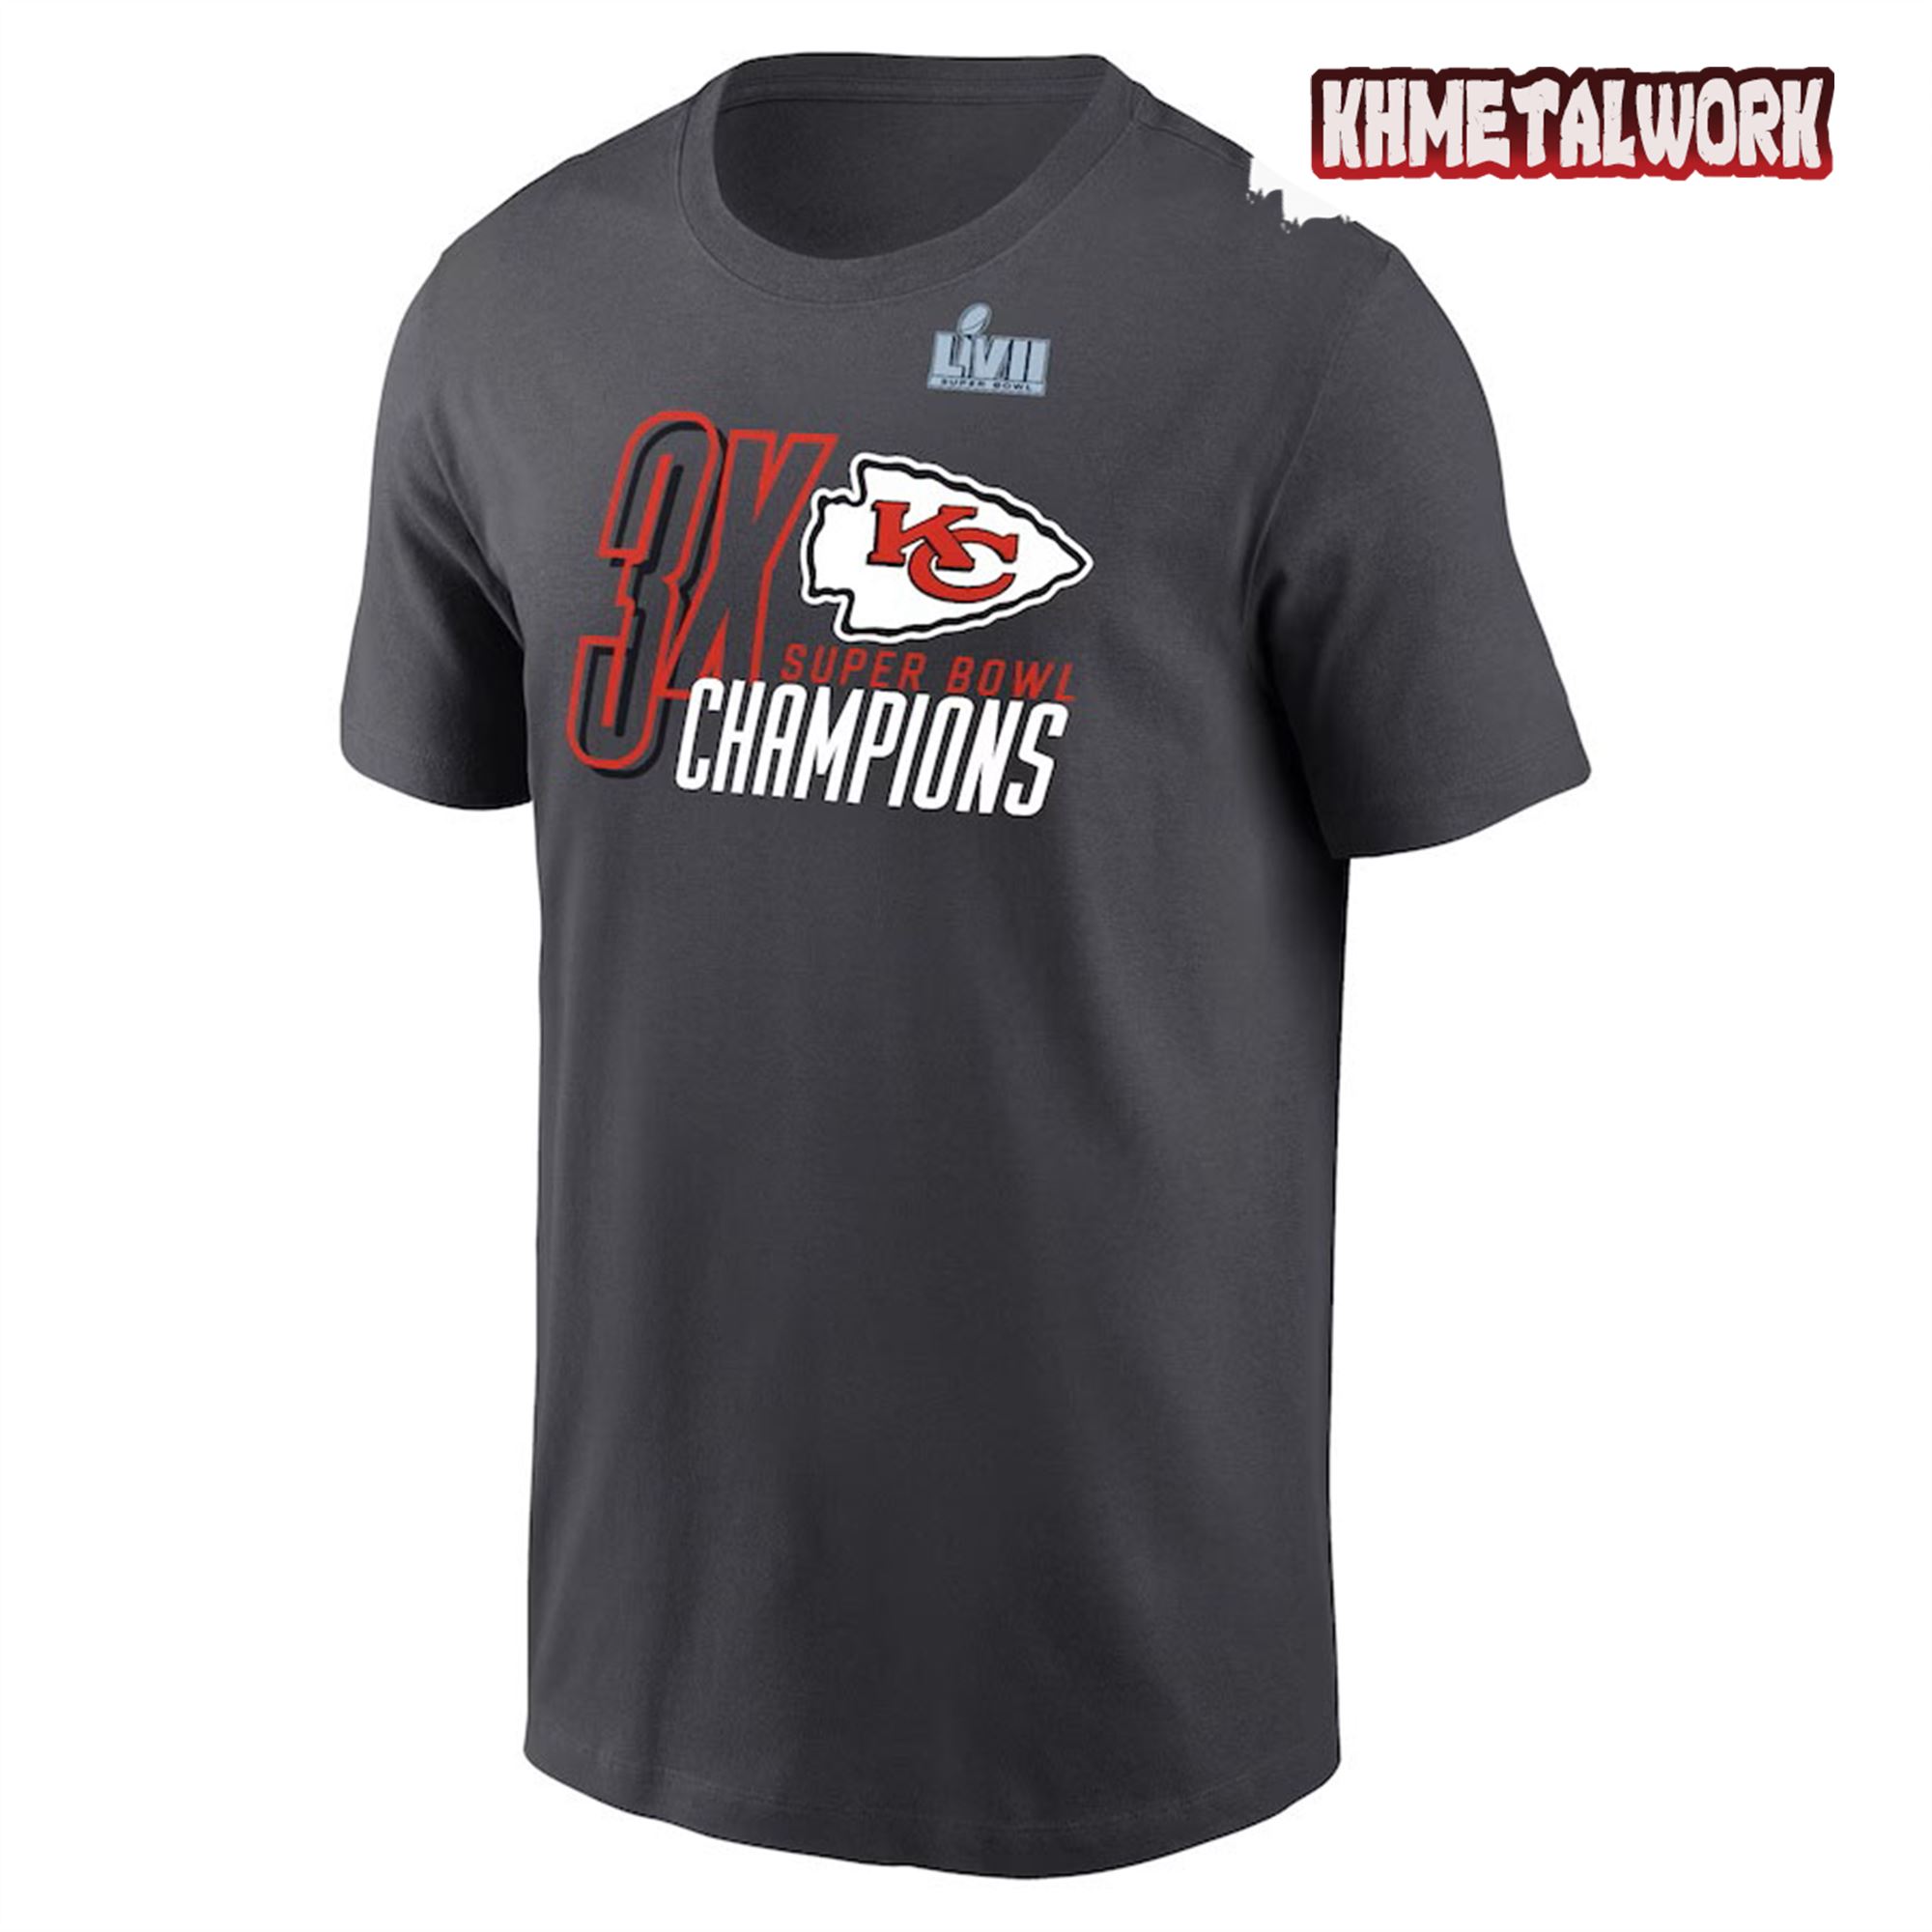 Show Off Your Kc Chiefs Pride With This 3x Super Bowl T-shirt